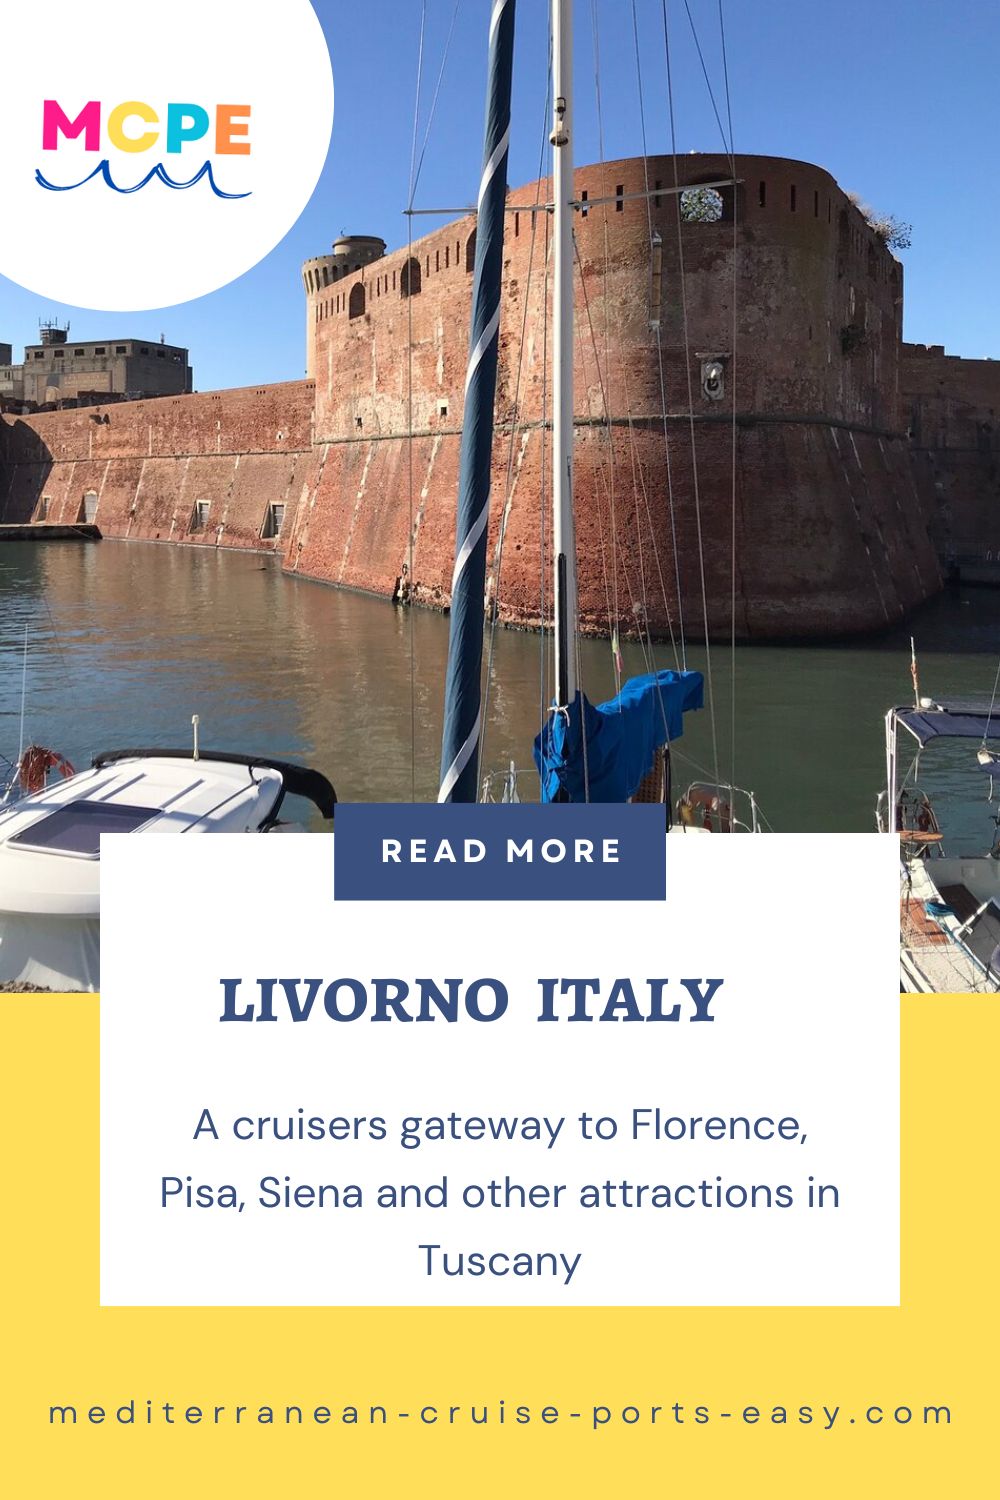 Find out what Livorno Italy is all about, where the cruise dock is and how to travel to Florence on your own or in organised shore excursions and daytrips